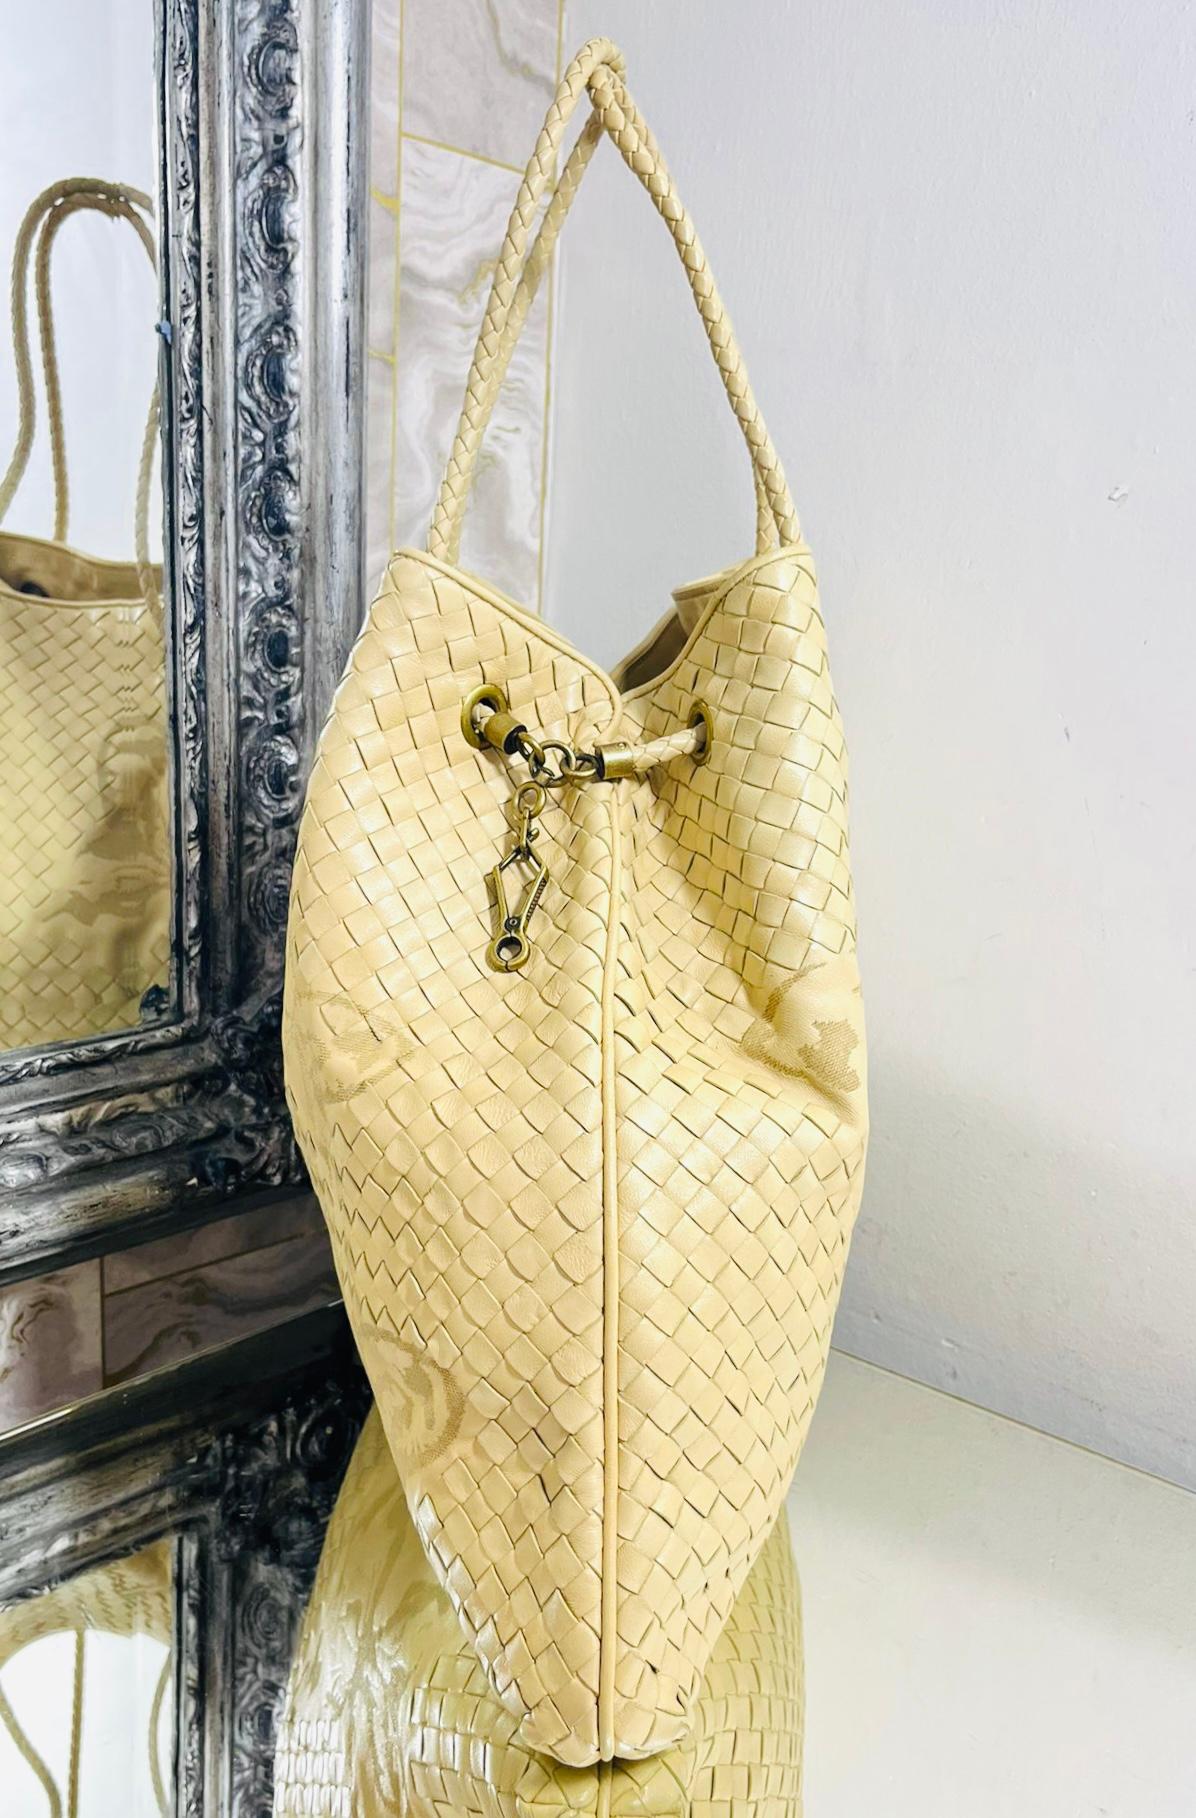 Bottega Veneta Butterfly Embossed Woven Leather Bag In Excellent Condition For Sale In London, GB